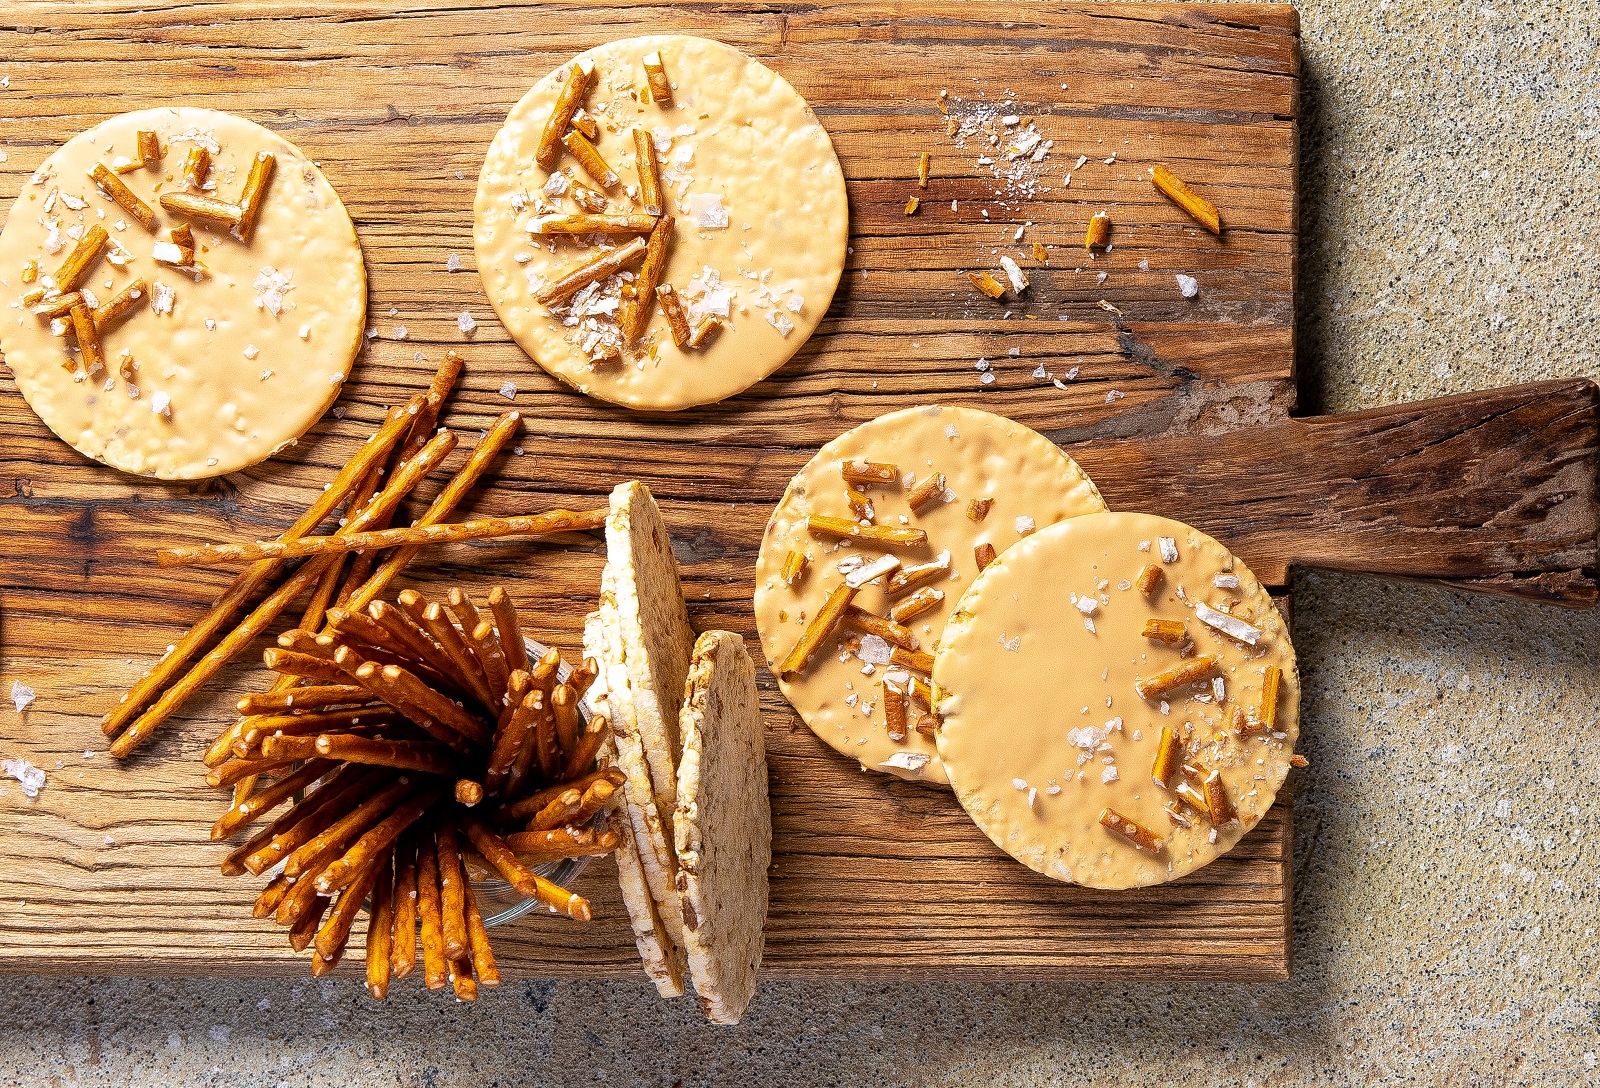 Corn Thins sliced dipped in melted caramilk & sprinkled with crushed pretzels